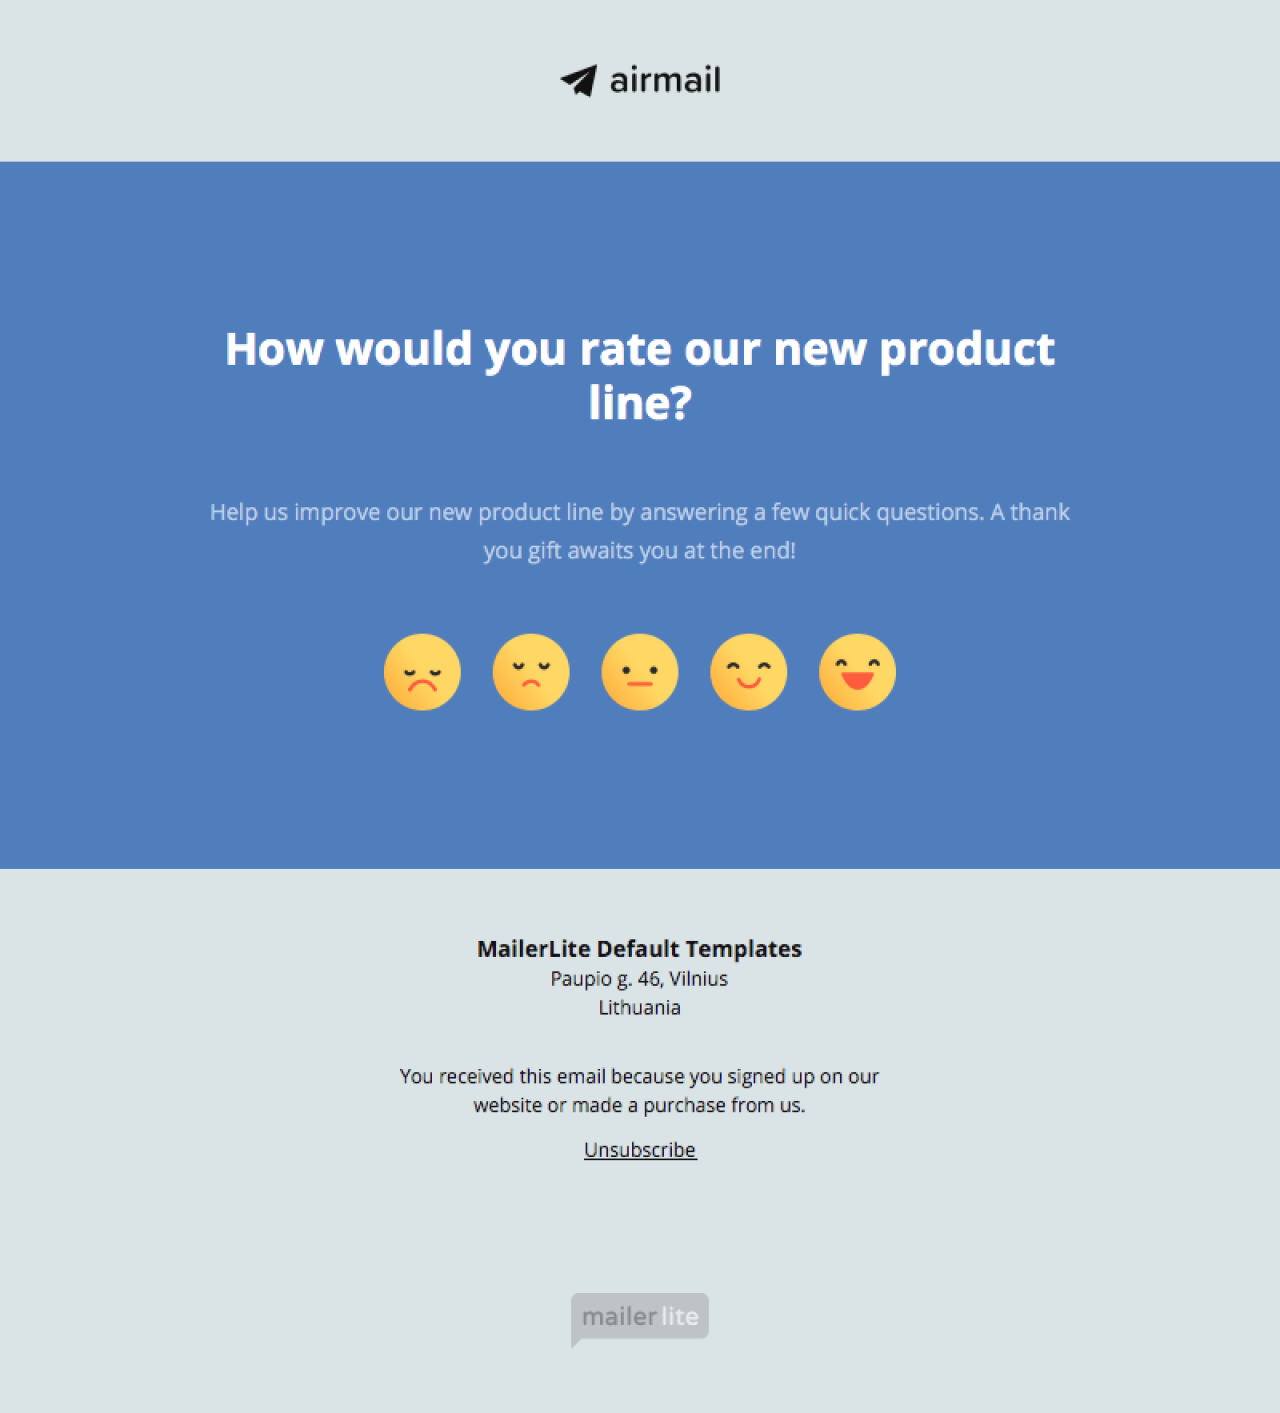 Customer Satisfaction example - Made with MailerLite